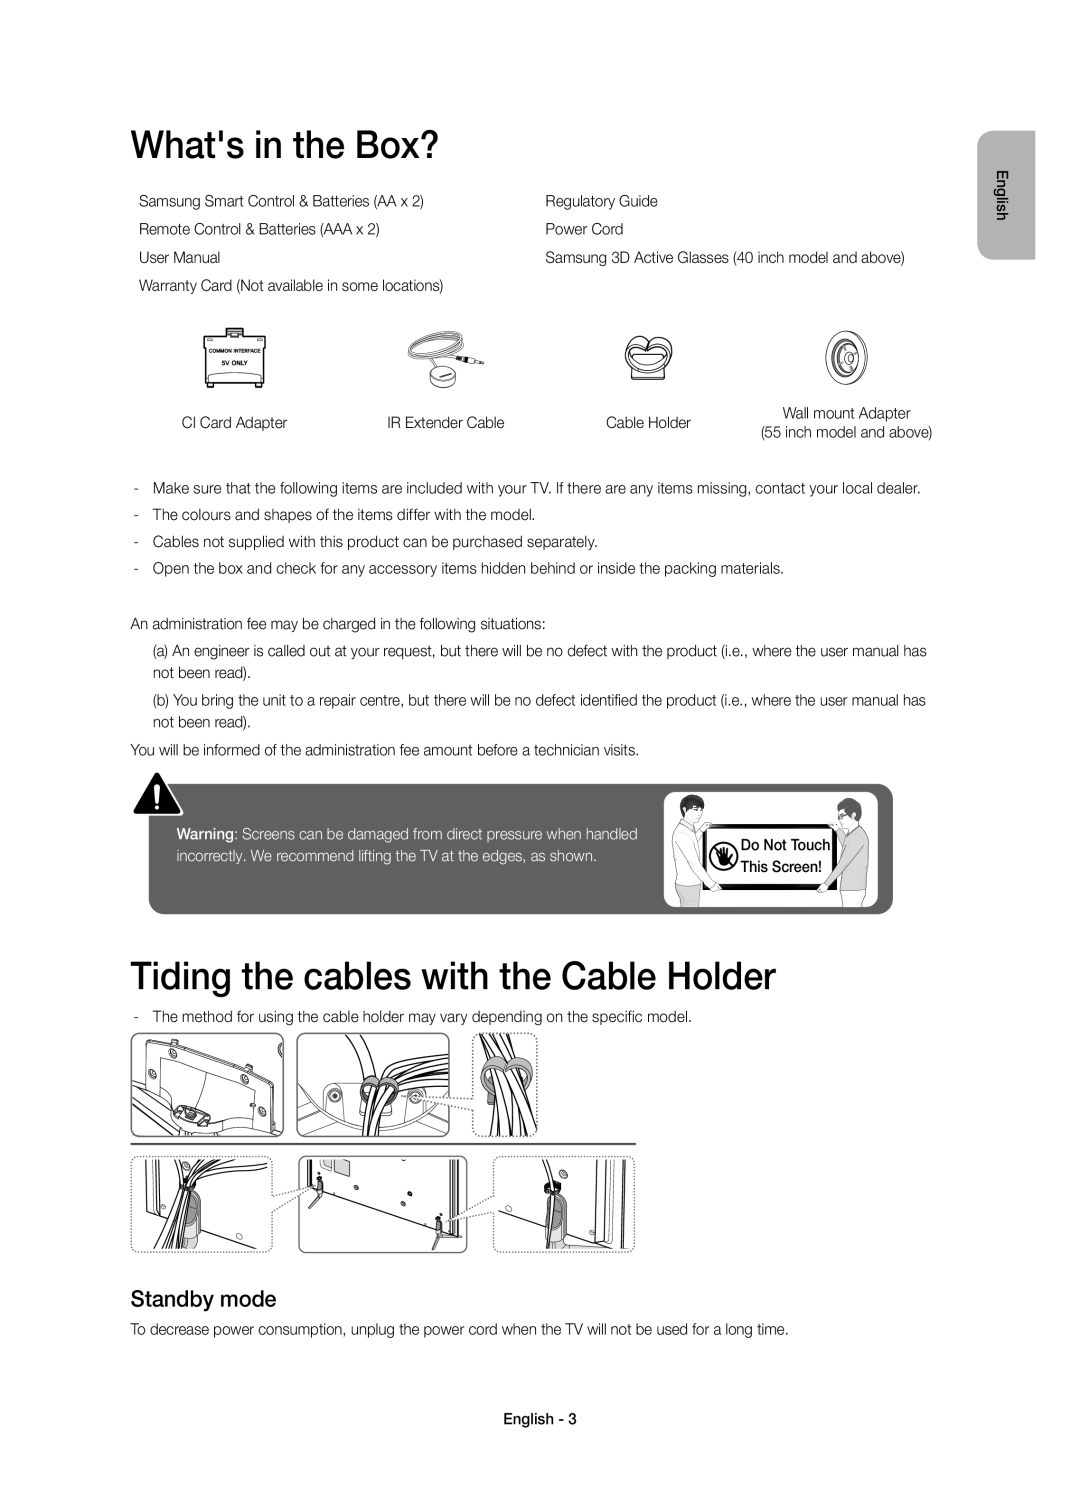 Samsung UE55H6400AWXXH manual Whats in the Box?, Tiding the cables with the Cable Holder, Standby mode, This Screen 